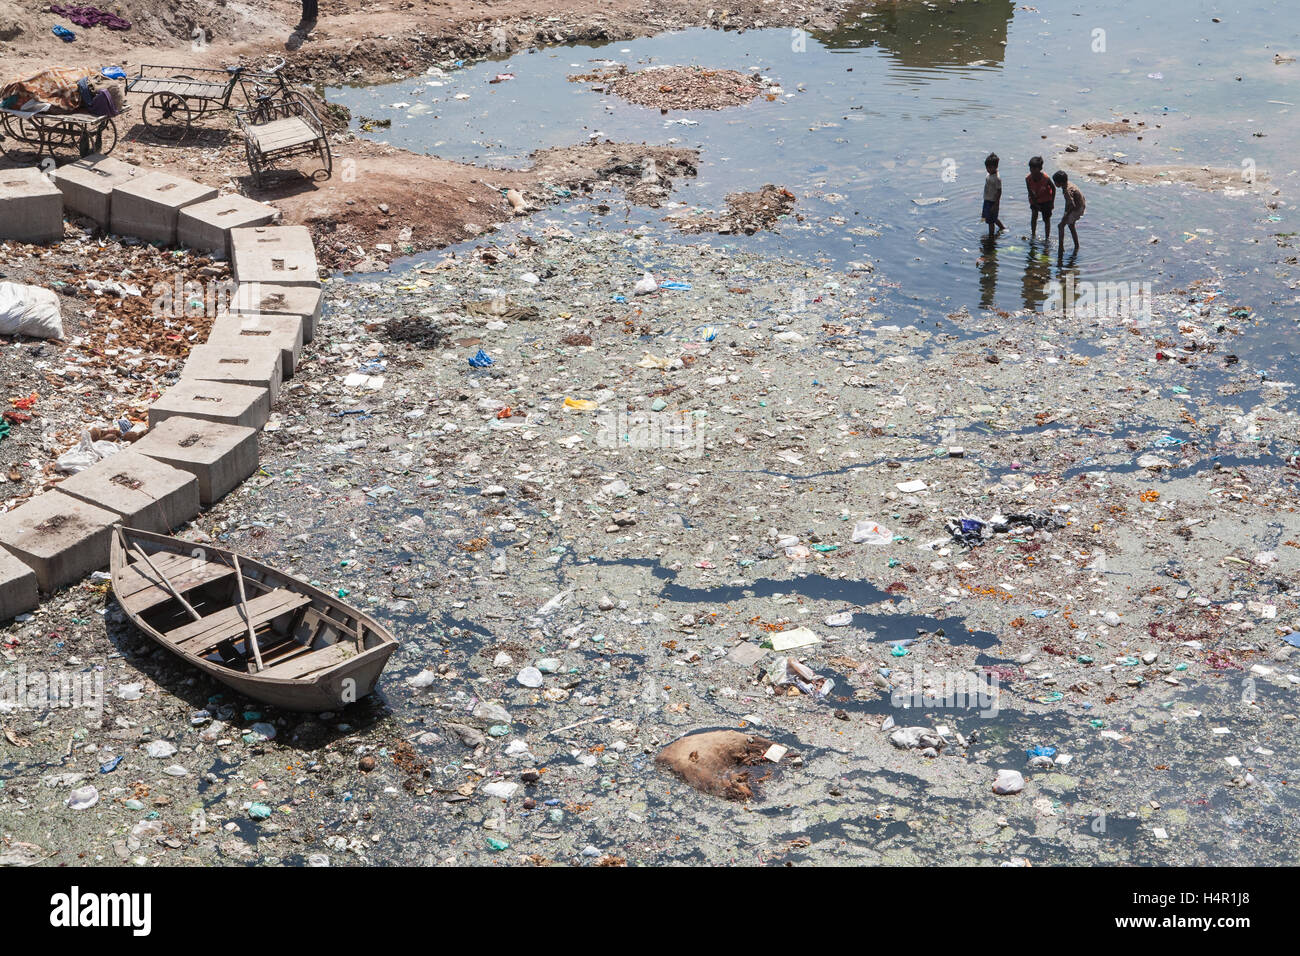 Children playing in filthy and polluted River Sabarmati in the centre center of Ahmedabad,Gujurat state,India,Asia. Stock Photo